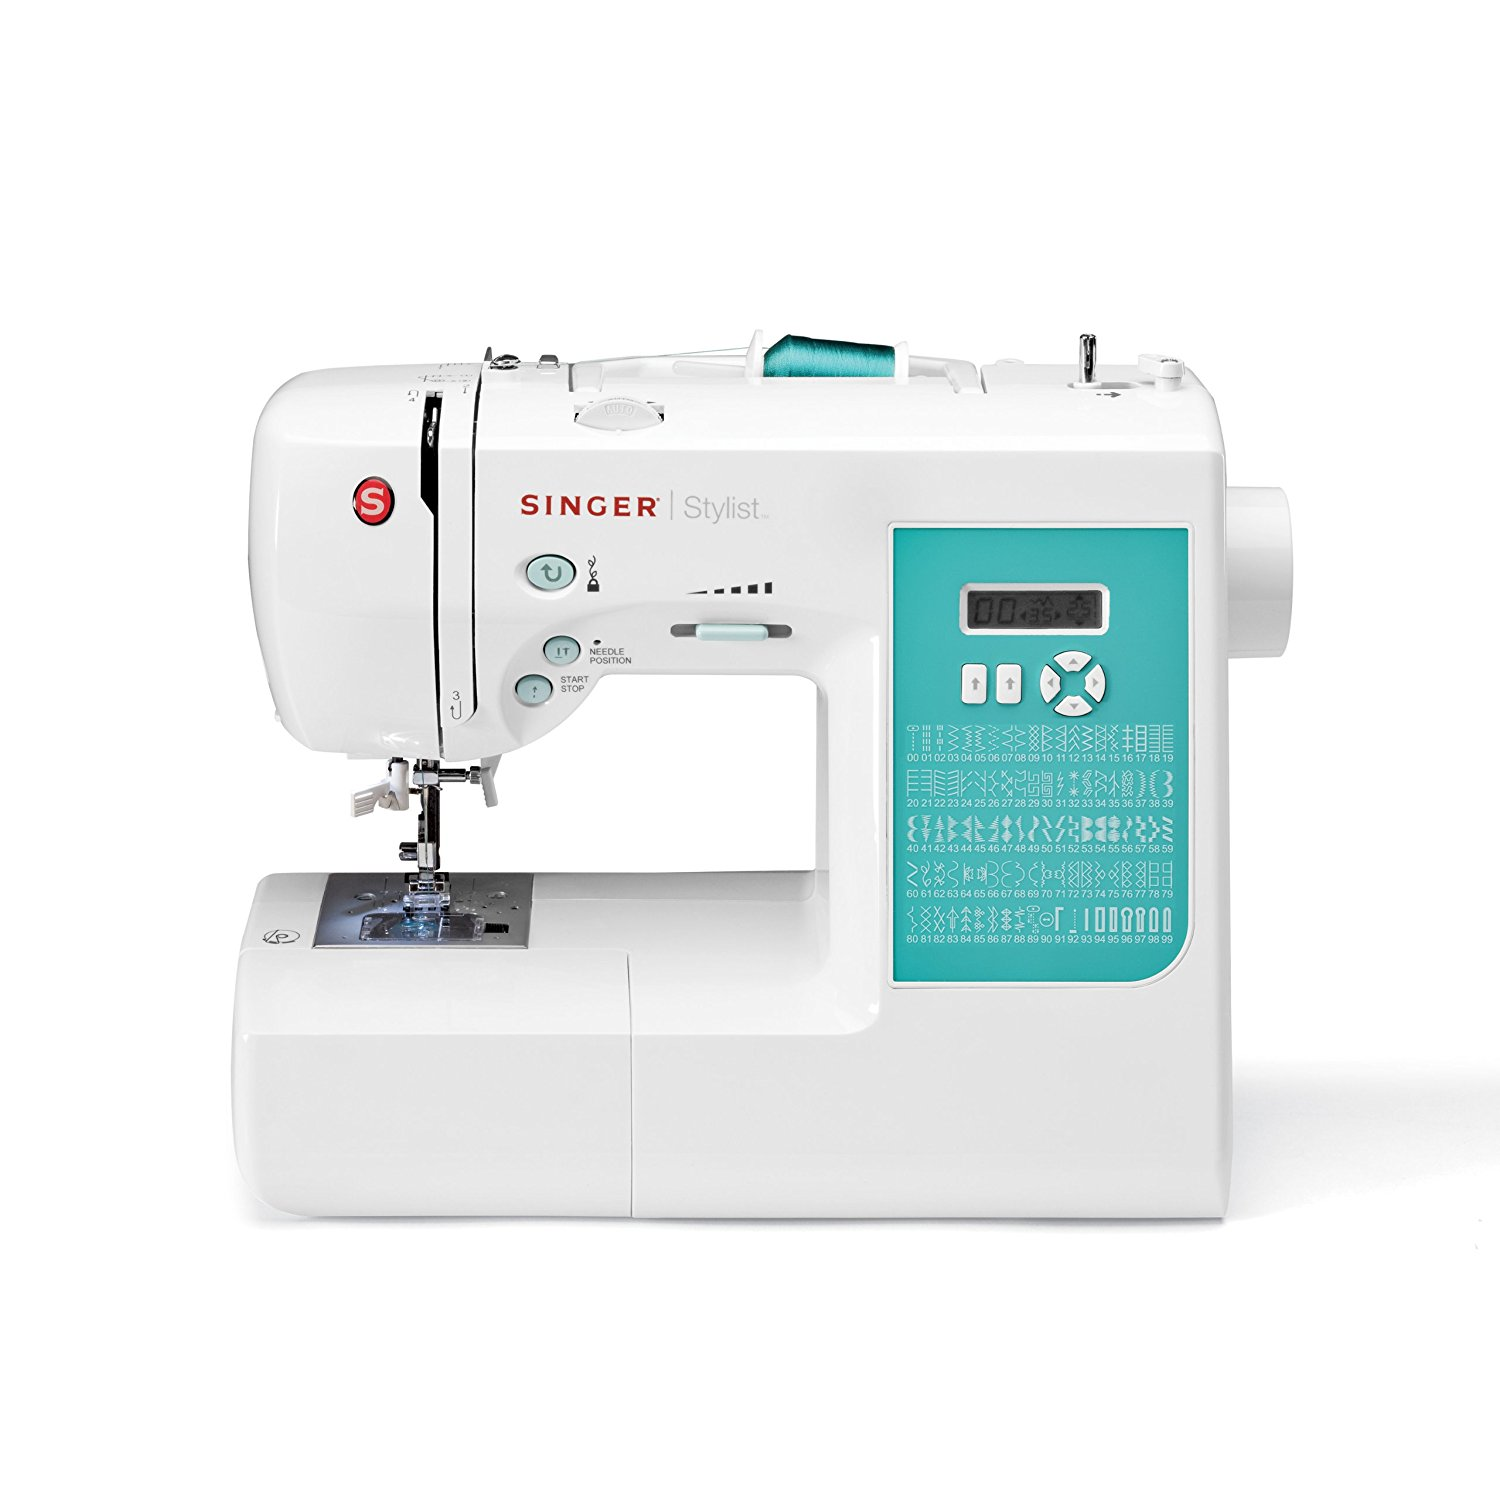 SINGER 100 Stitch Computerized Sewing Machine Only $160.00! Highly Rated!!